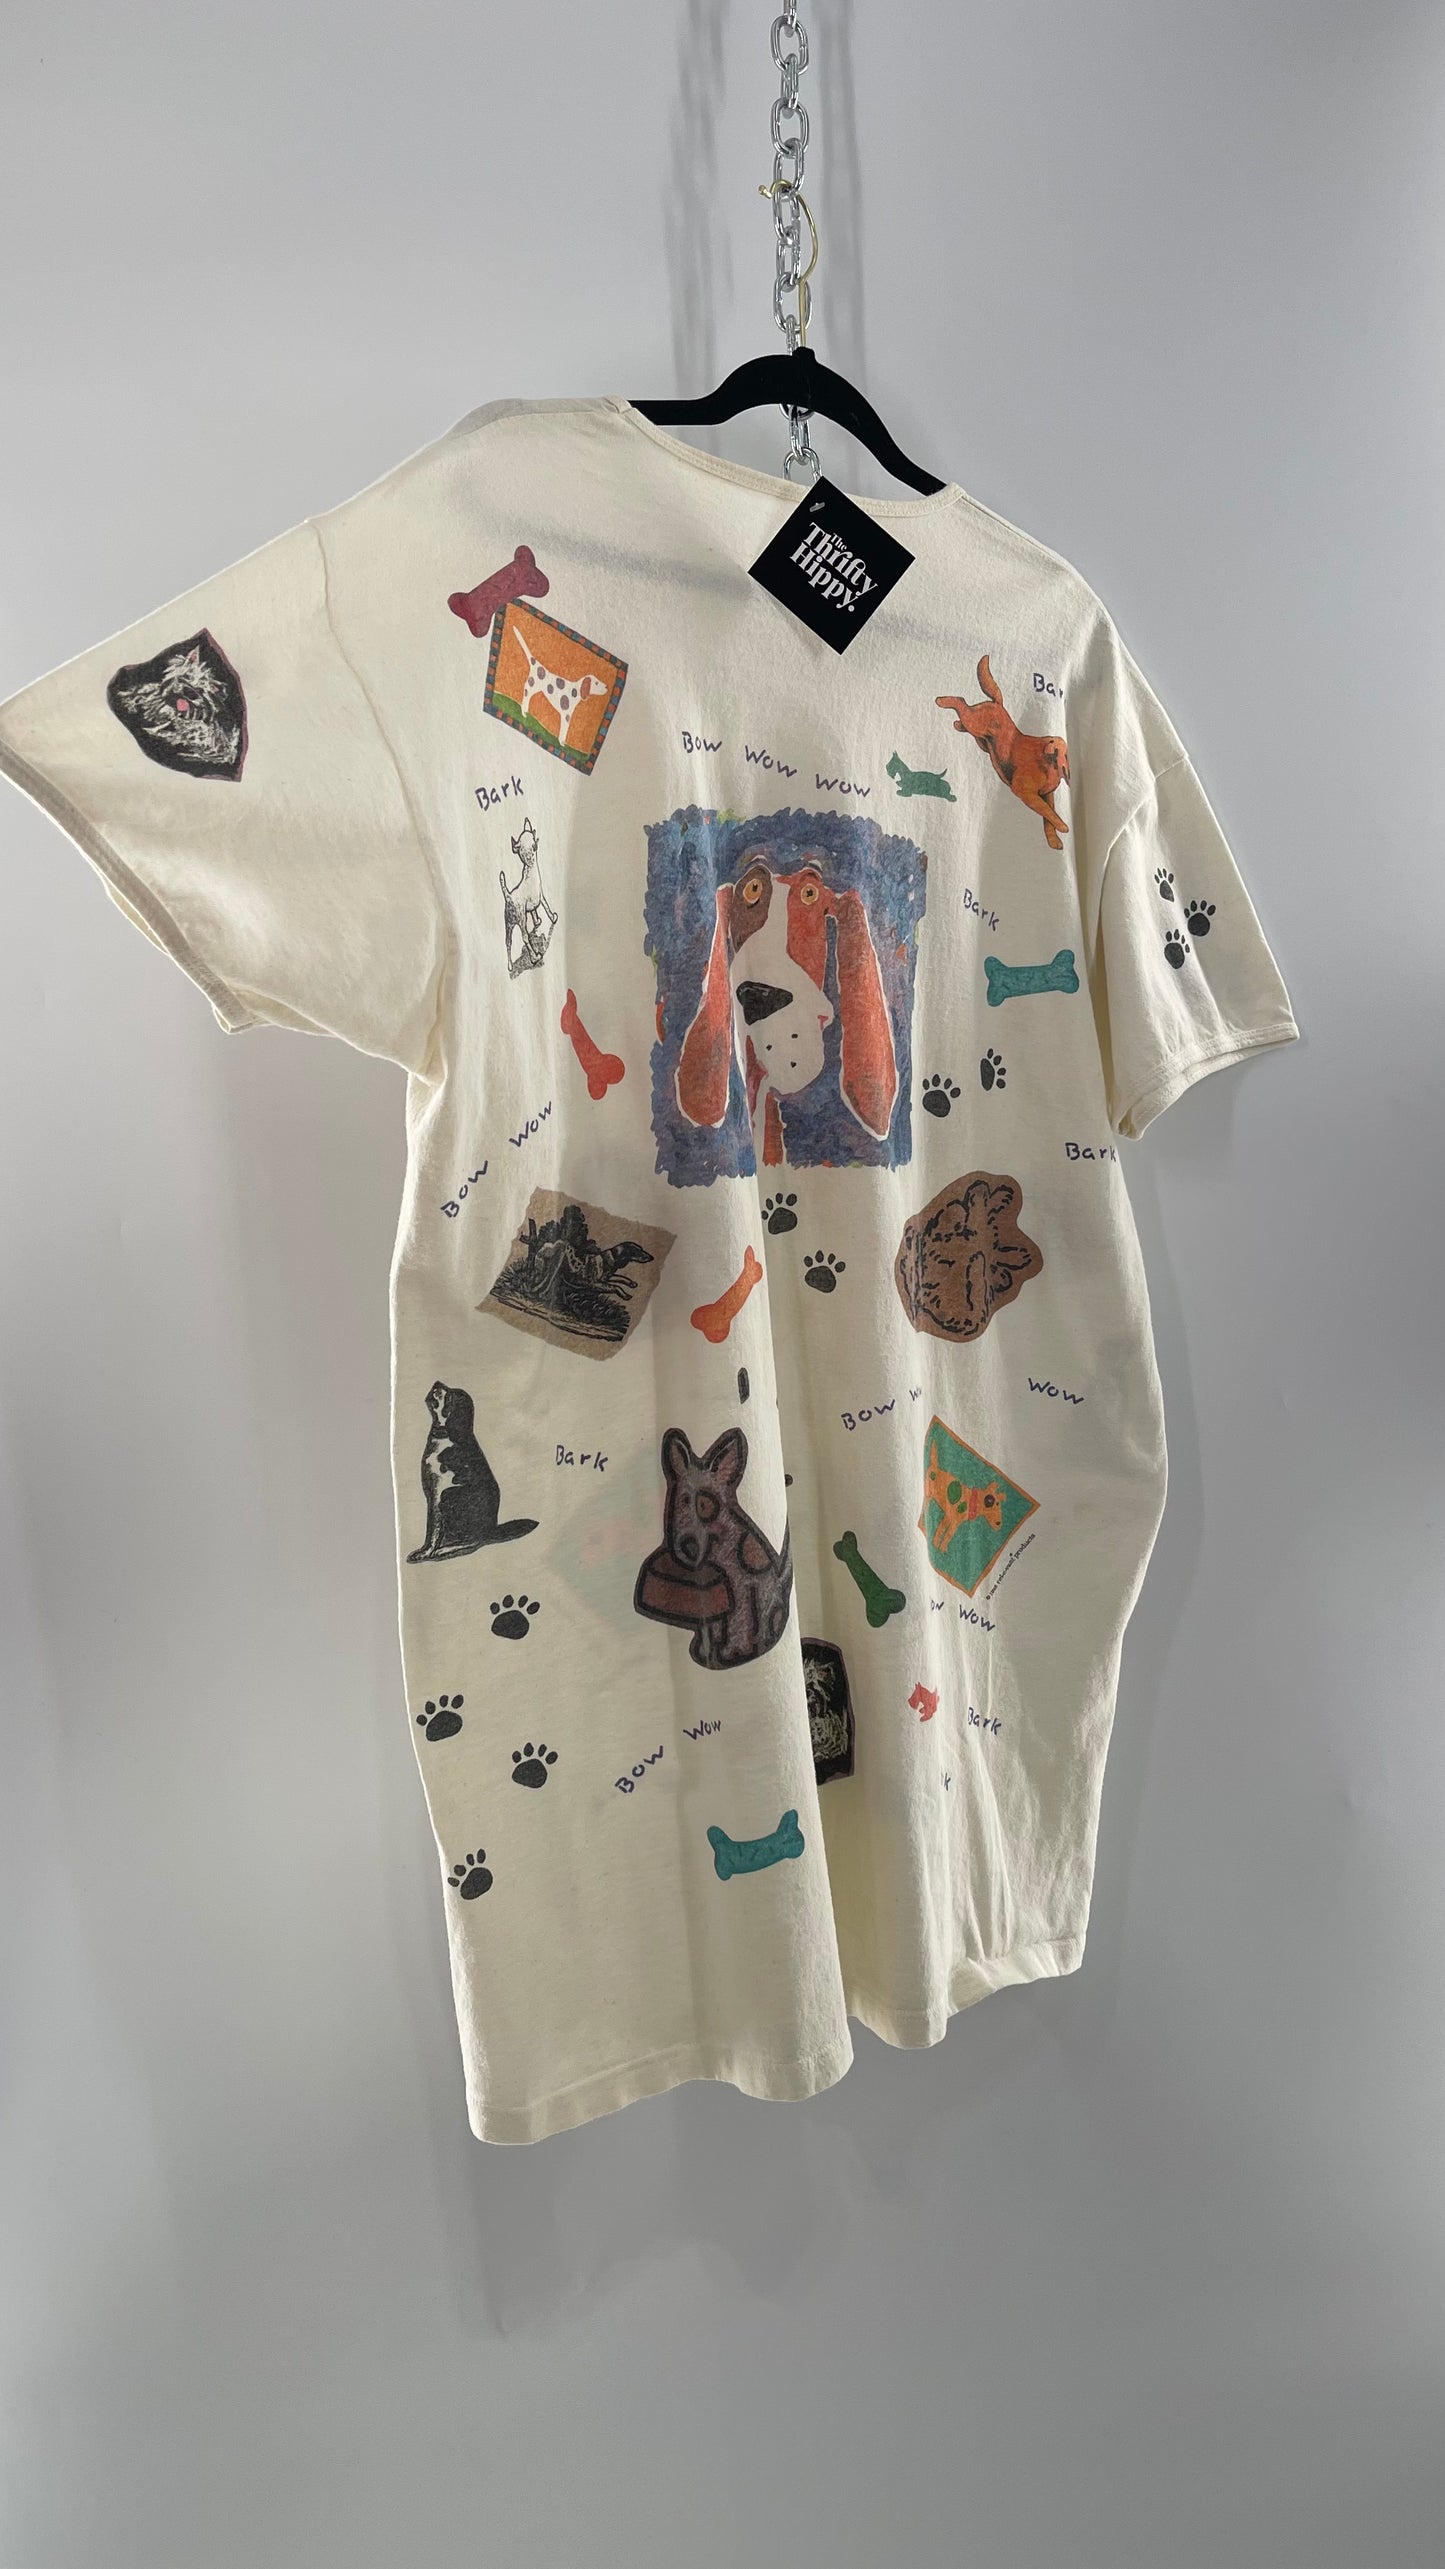 Vintage Bow Wow Oversized Graphic T (XXL)